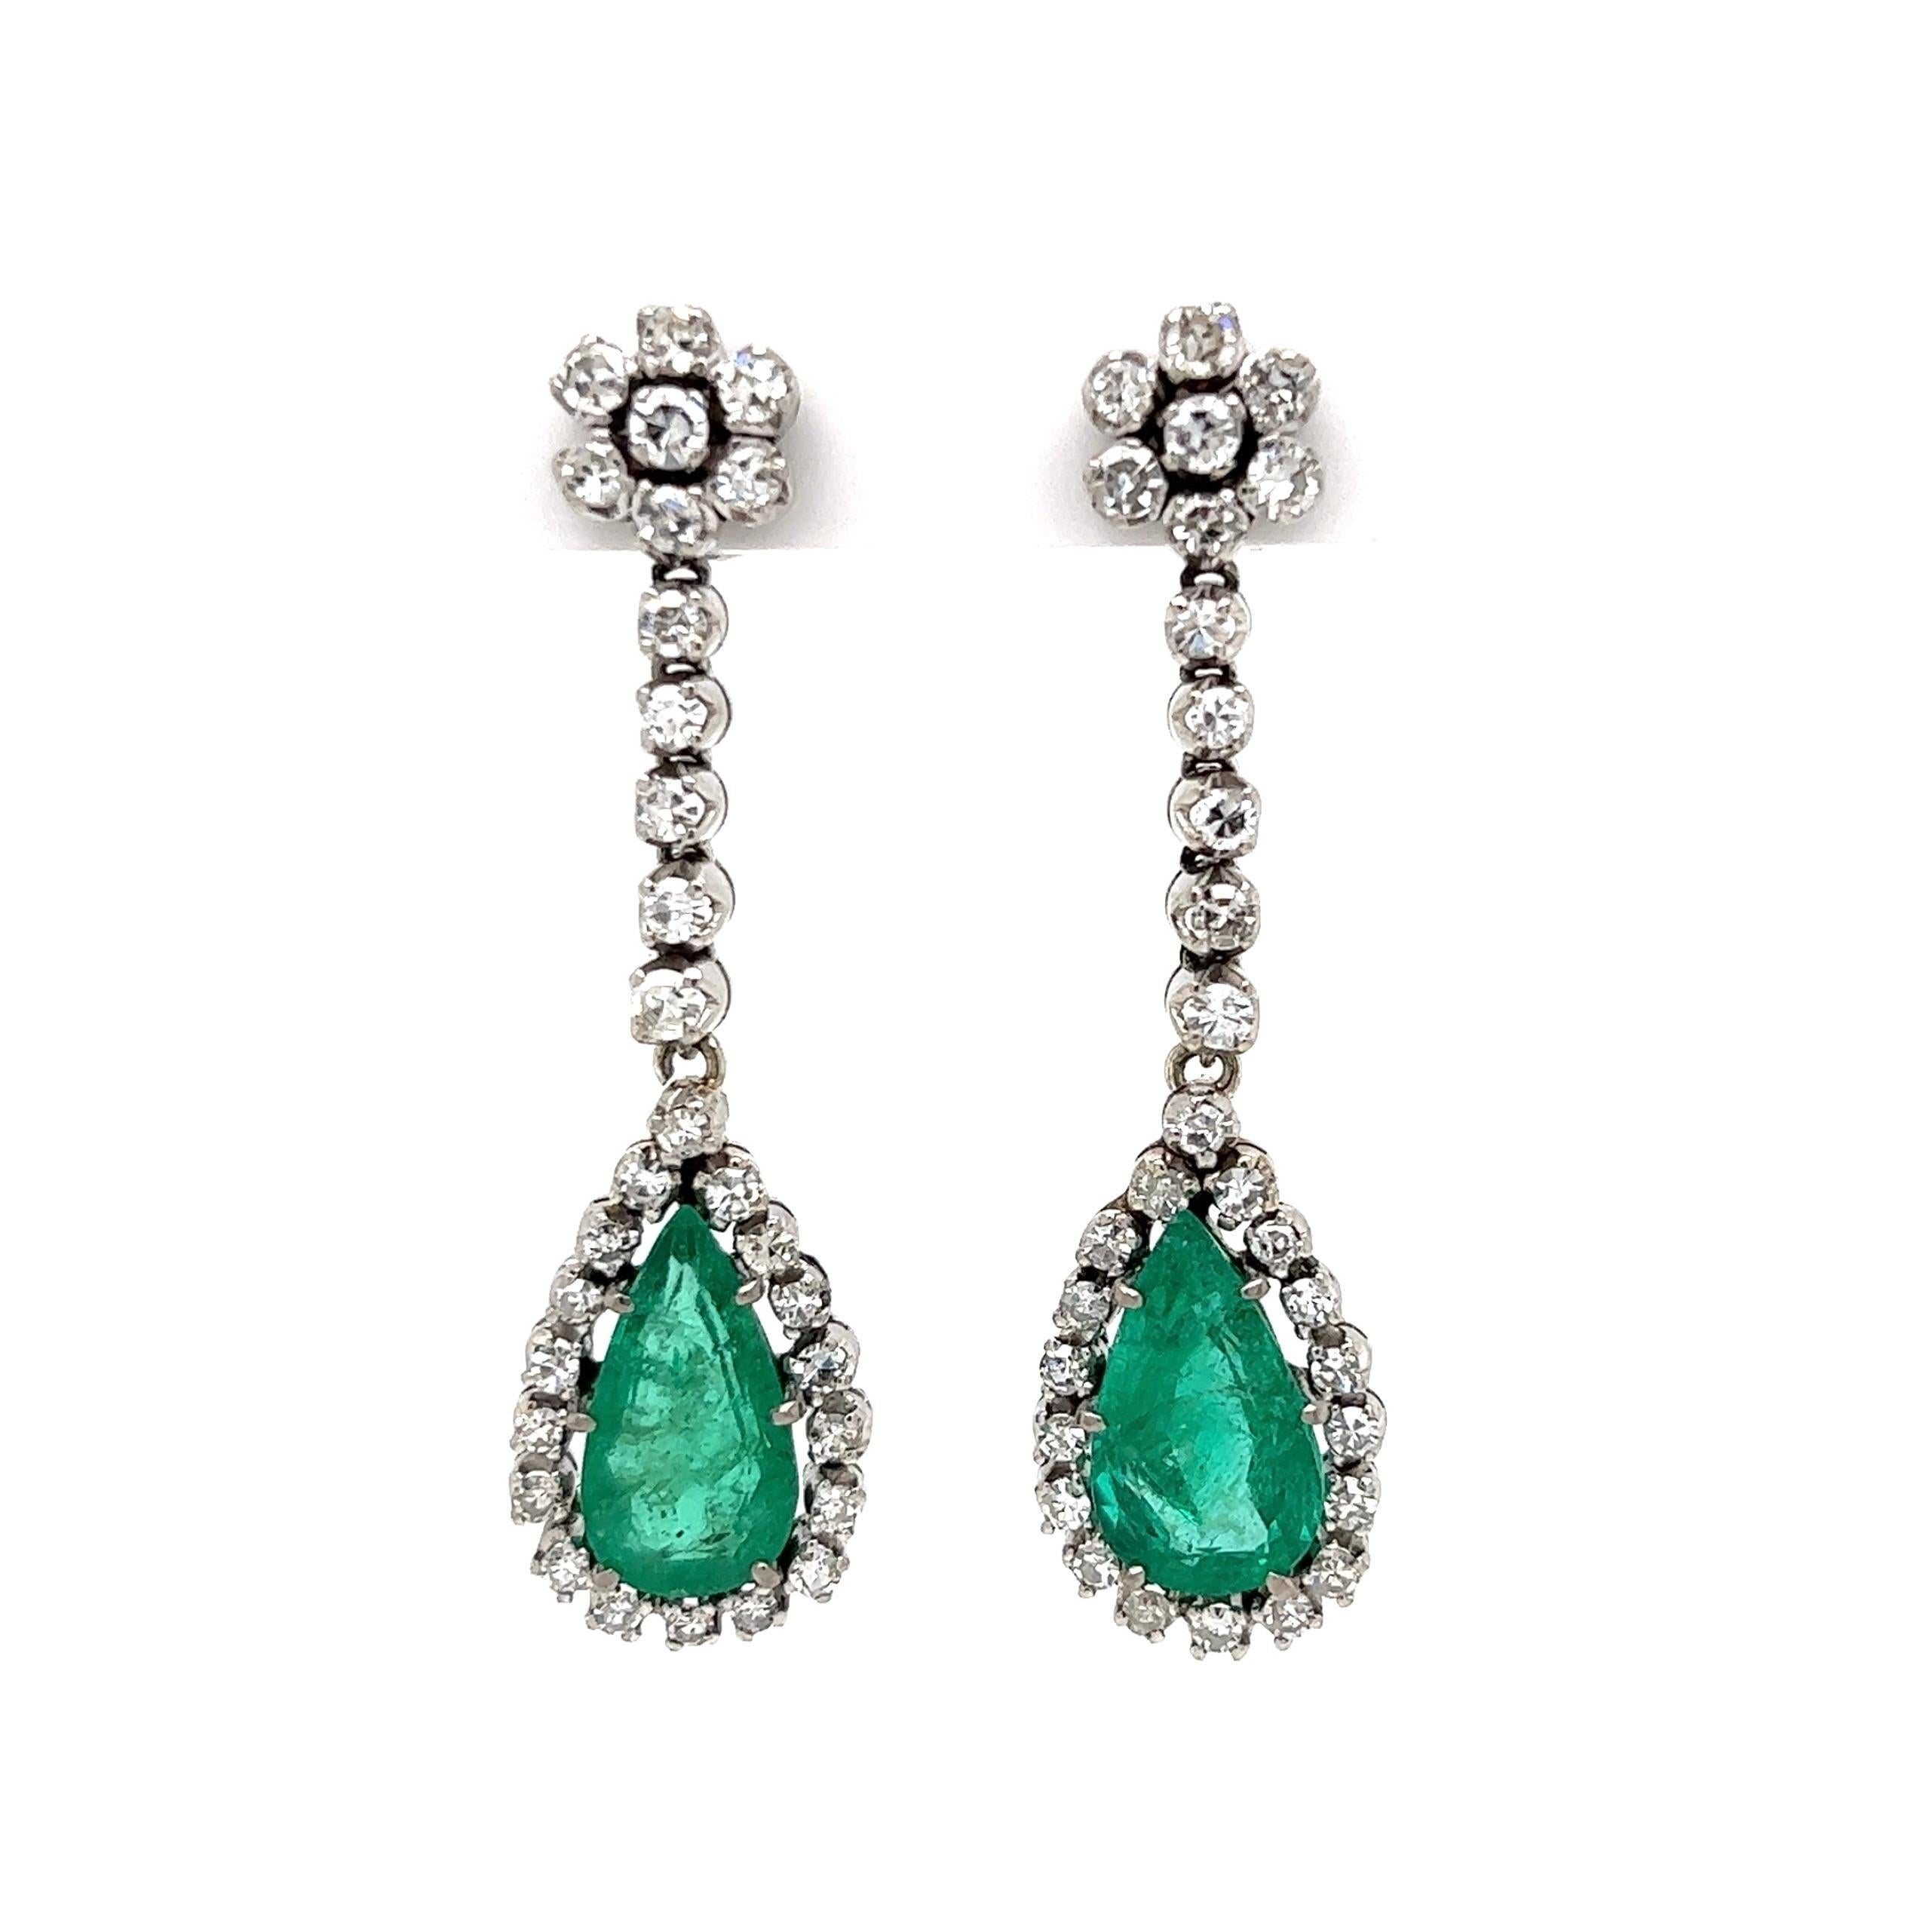 
Simply Beautiful! Finely Detailed Art Deco Style Diamond and Emerald Drop Earrings. Hand crafted in 18K White Gold and Hand set with, 60 Single-Cut Diamonds weighing approx. 2.00tcw and Pear-shaped Emeralds approx. 4.50tcw. Earrings measuring